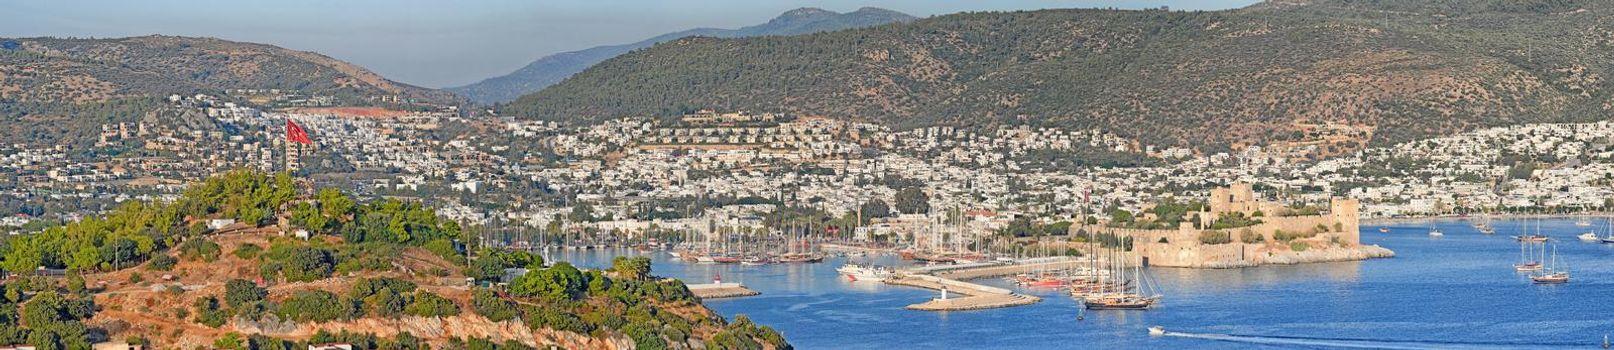 Panorama view of city and hills in romantic harbor of Bodrum in Turkey during the day. Scenic landscape view of sailing yachts in cruise port and bay. Tourism abroad, overseas in Aegean sea dockyard.